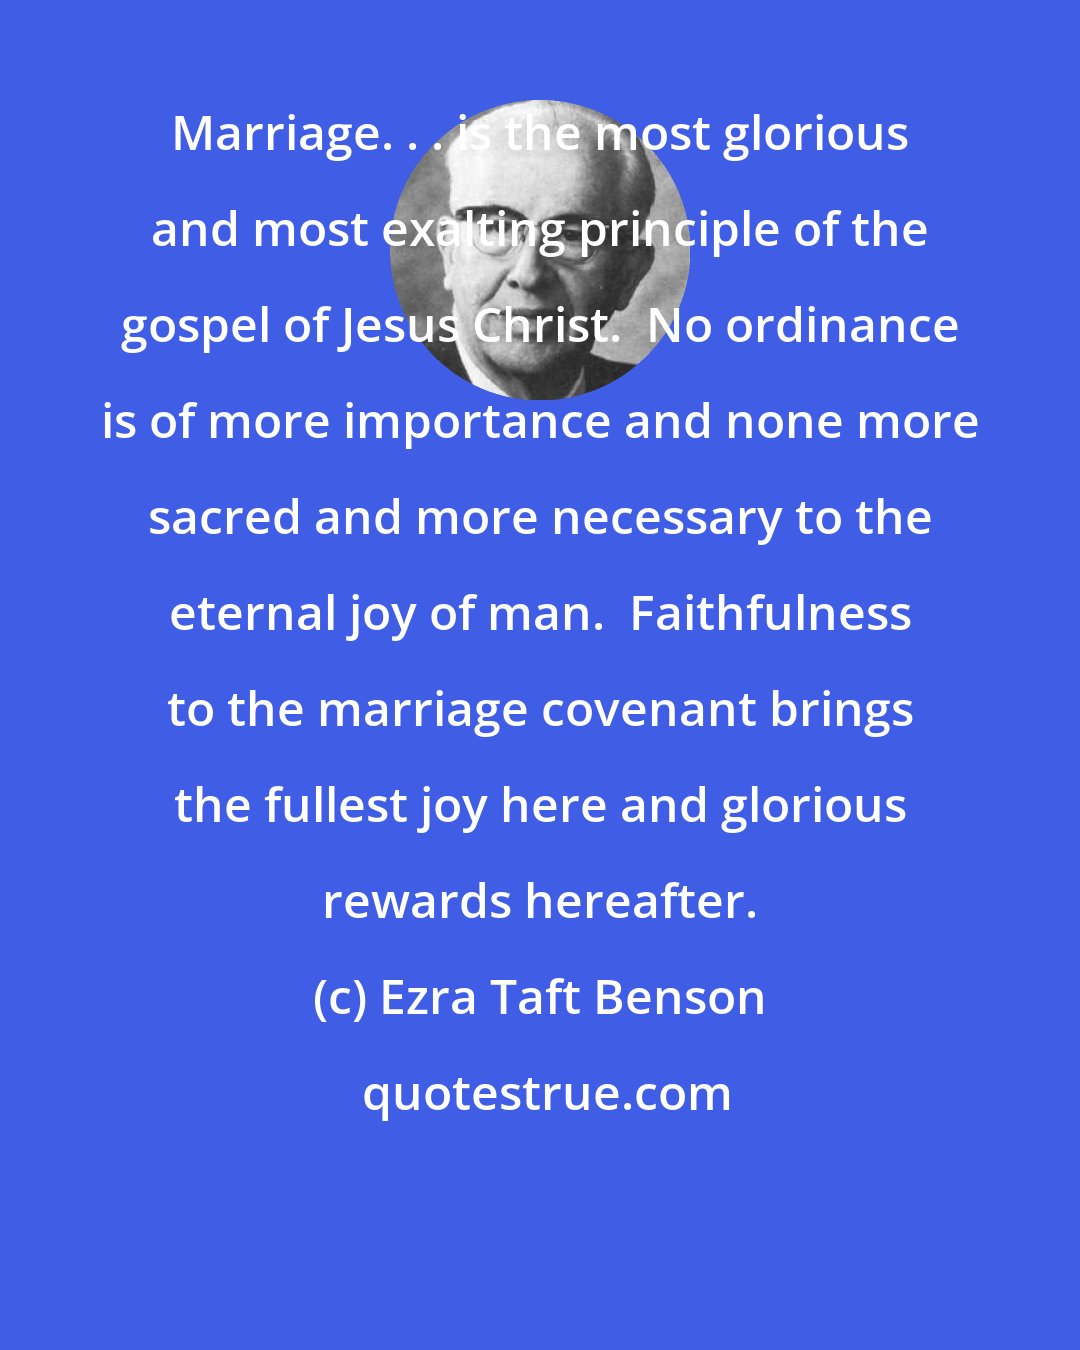 Ezra Taft Benson: Marriage. . . is the most glorious and most exalting principle of the gospel of Jesus Christ.  No ordinance is of more importance and none more sacred and more necessary to the eternal joy of man.  Faithfulness to the marriage covenant brings the fullest joy here and glorious rewards hereafter.